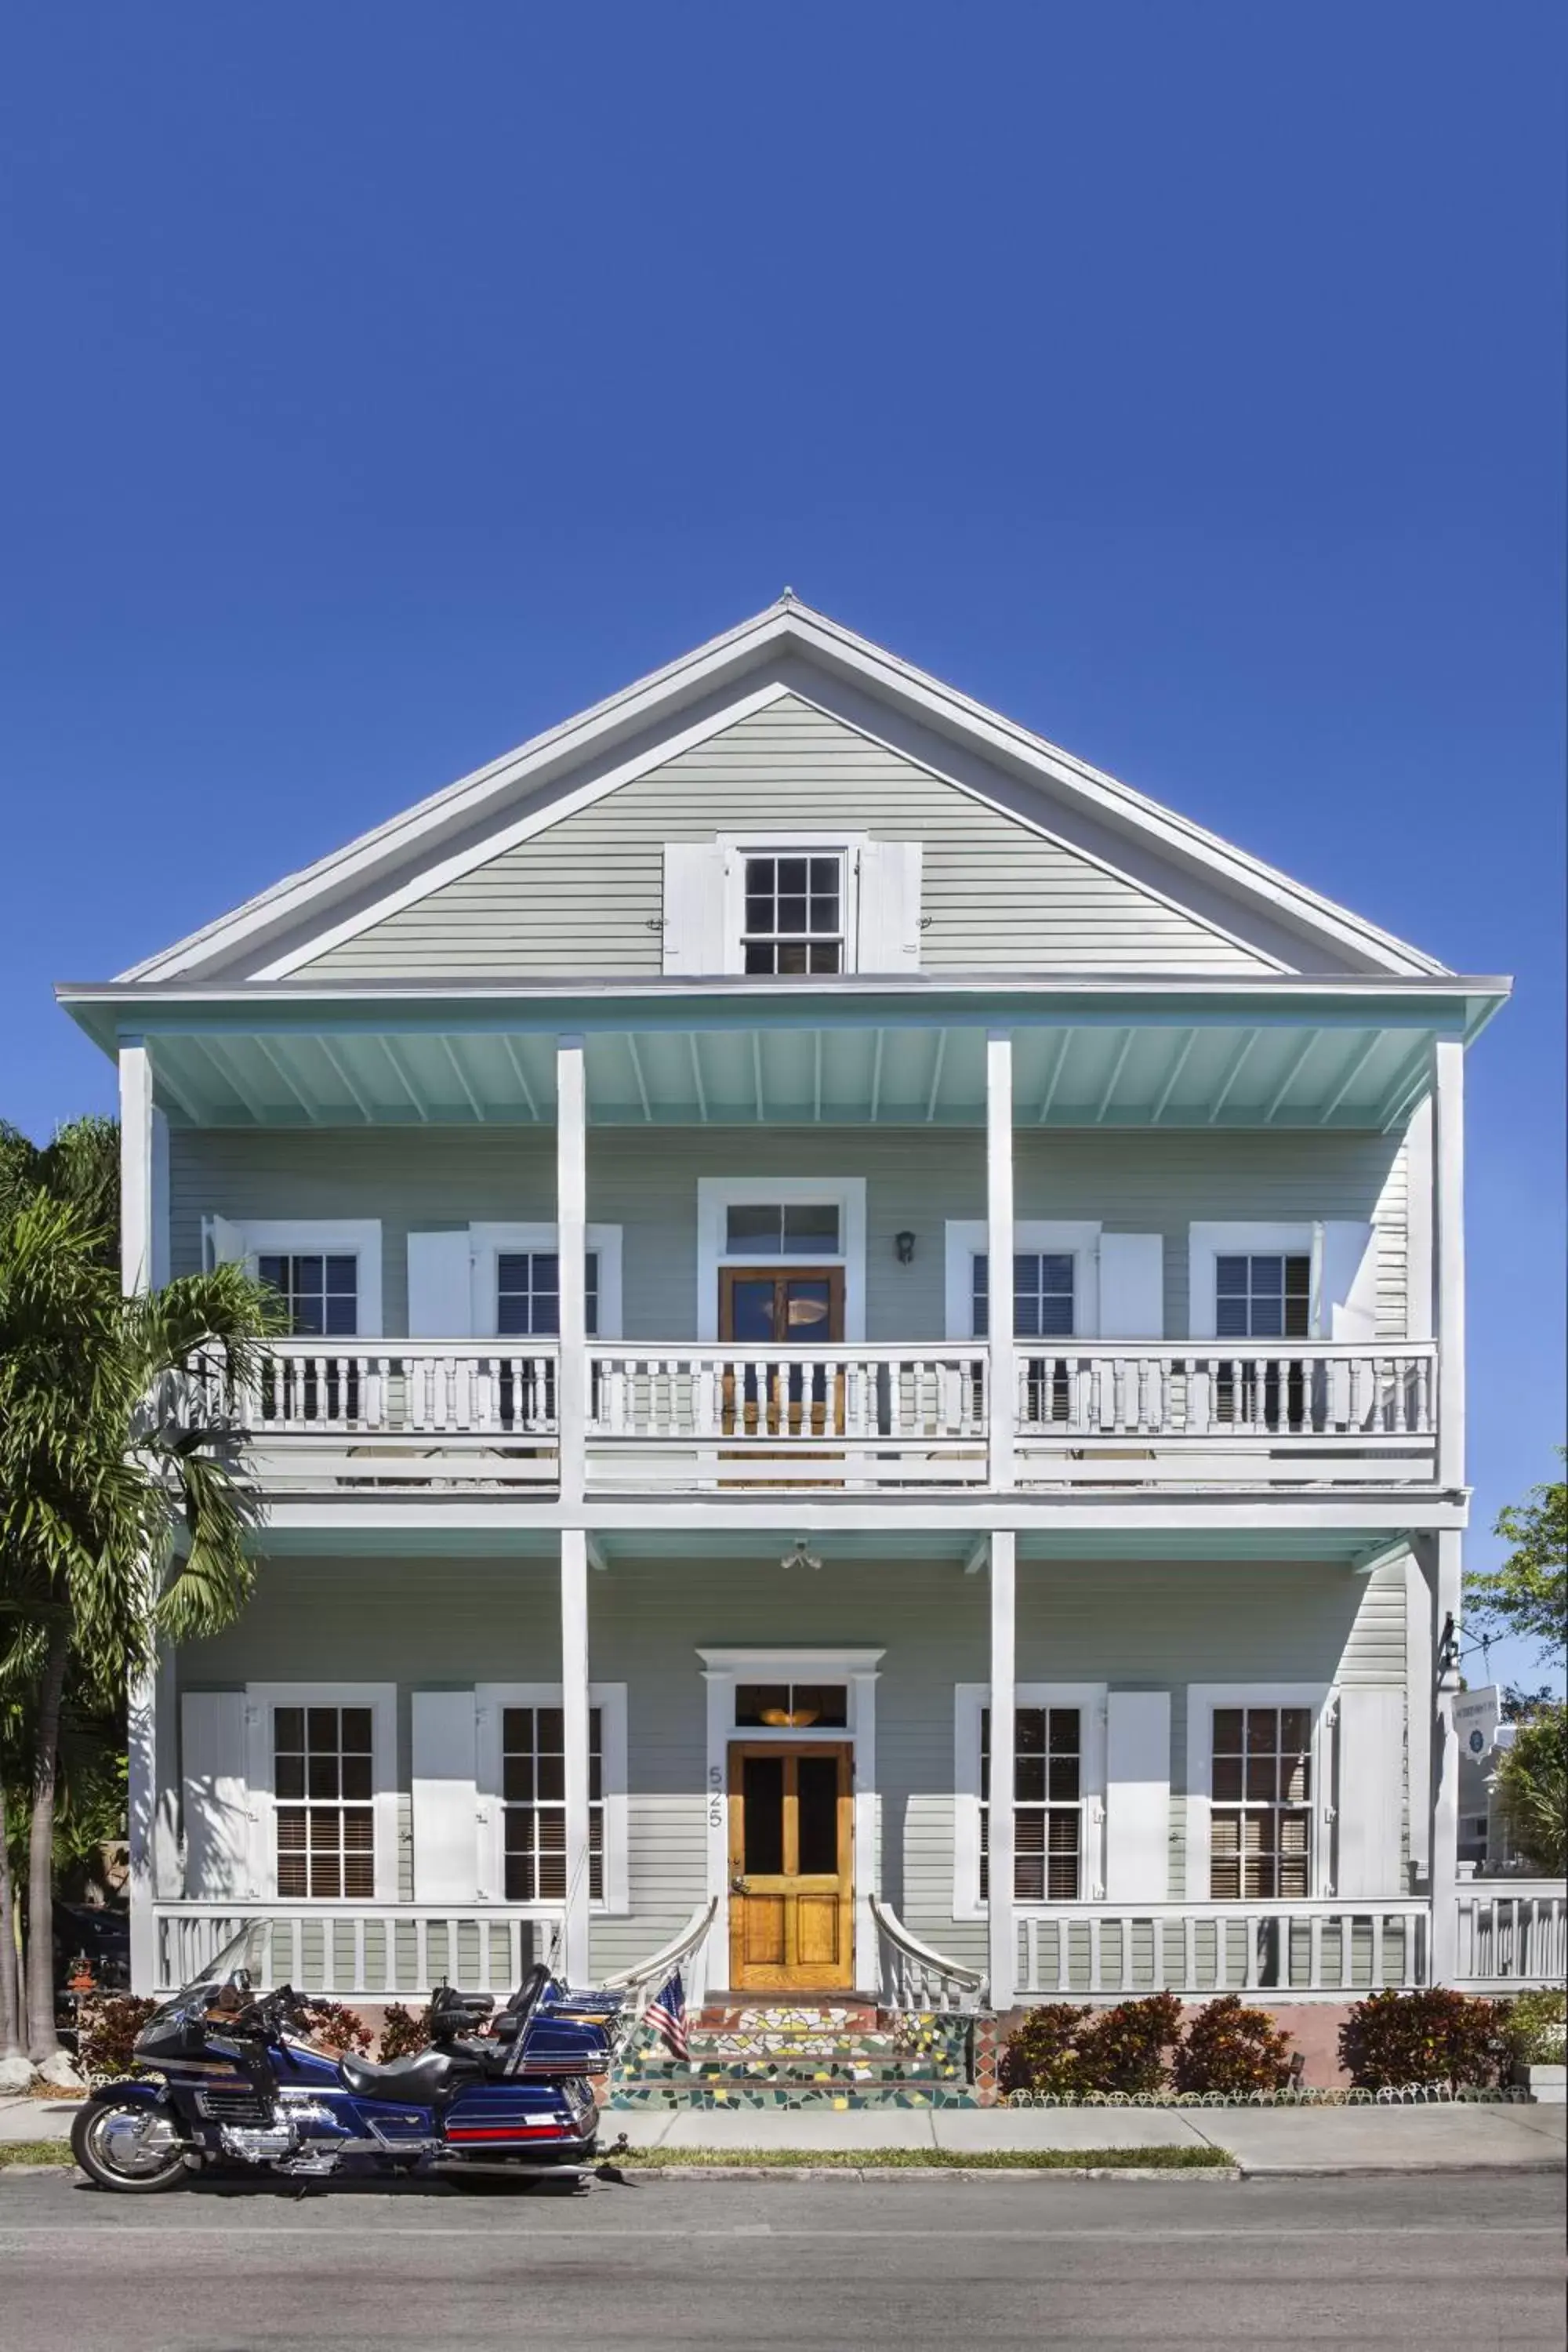 Facade/entrance, Property Building in Southernmost Inn Adult Exclusive